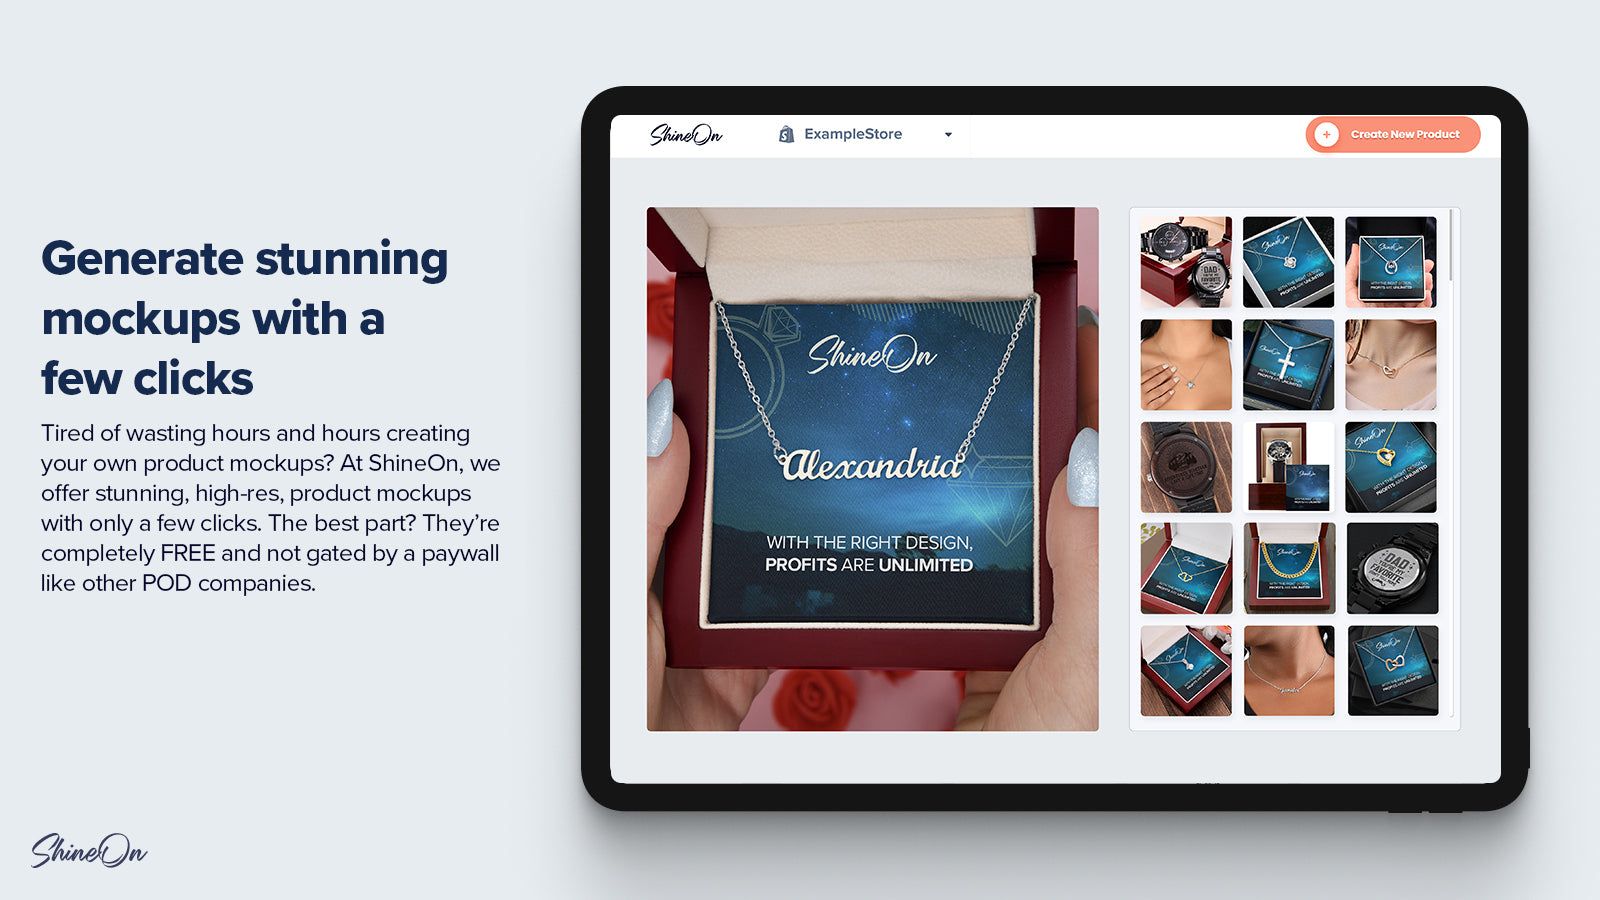 Generate Stunning Mockups With a Few Clicks